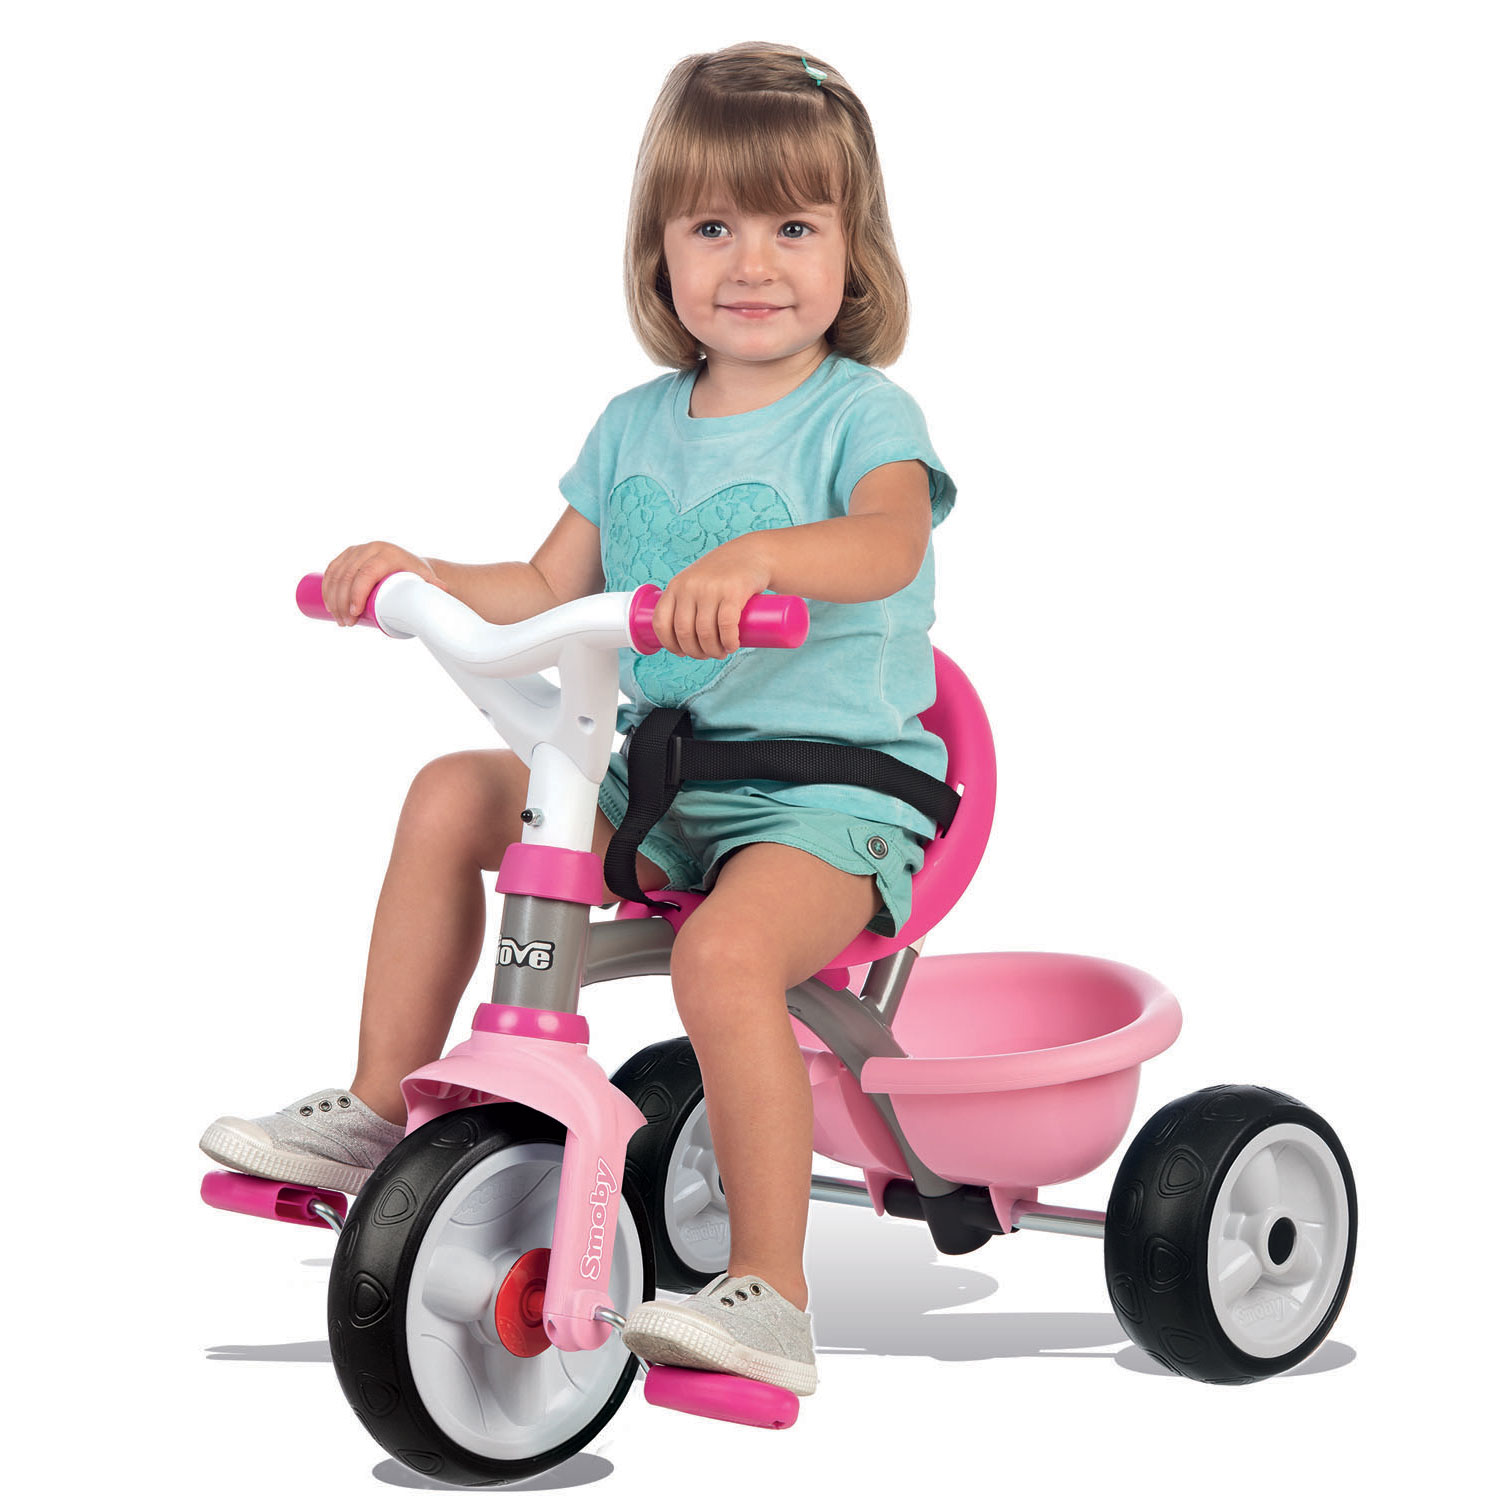 Smoby Be Move Driewieler - Roze